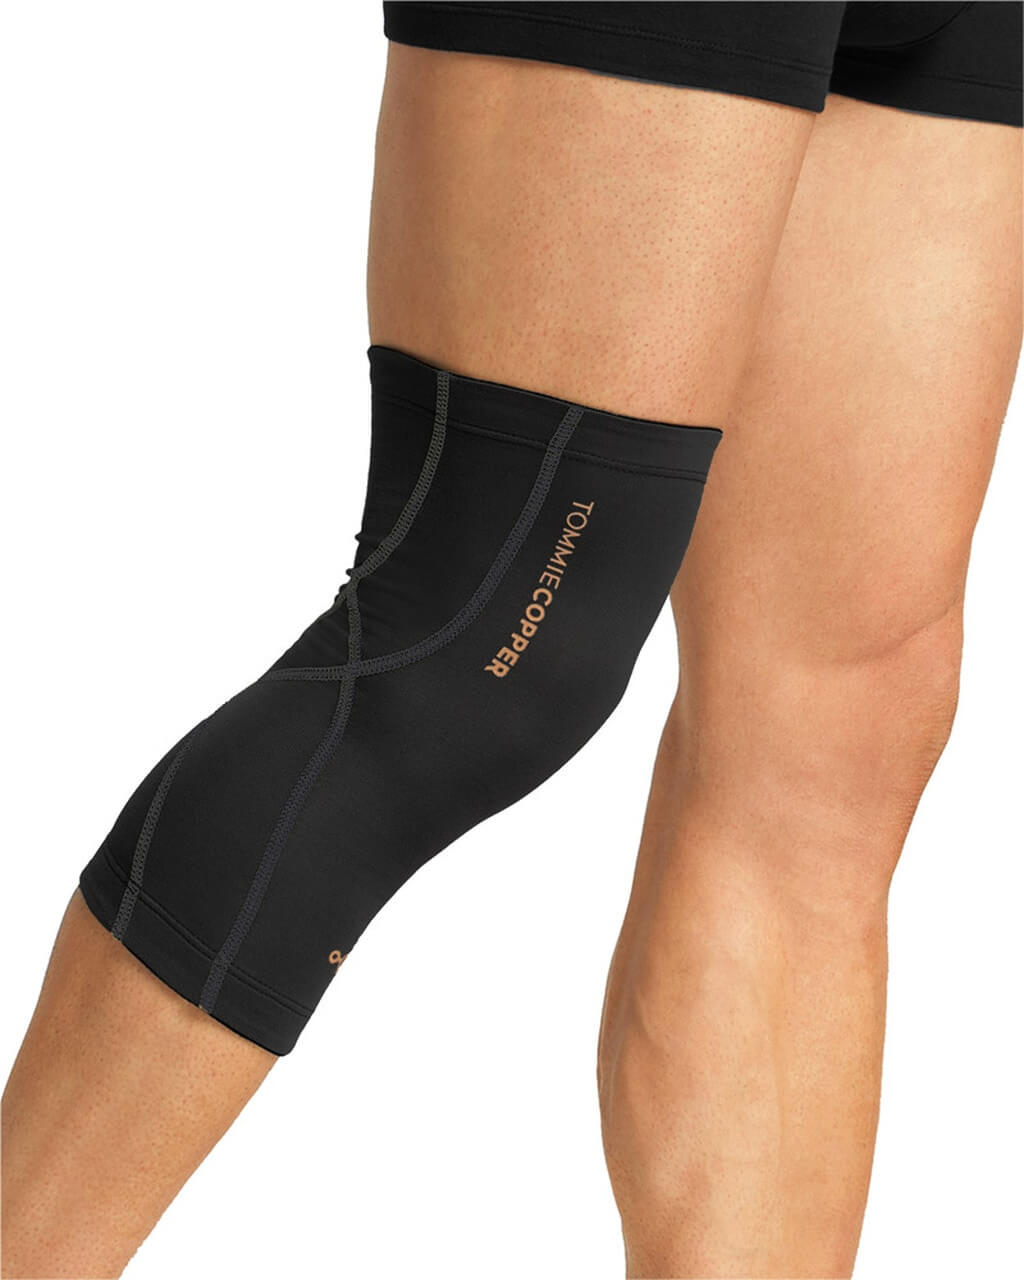 Tommie Copper Sport Compression Knee Sleeve, Grey Camo, Large/Extra-Large,  1 Count per Pack